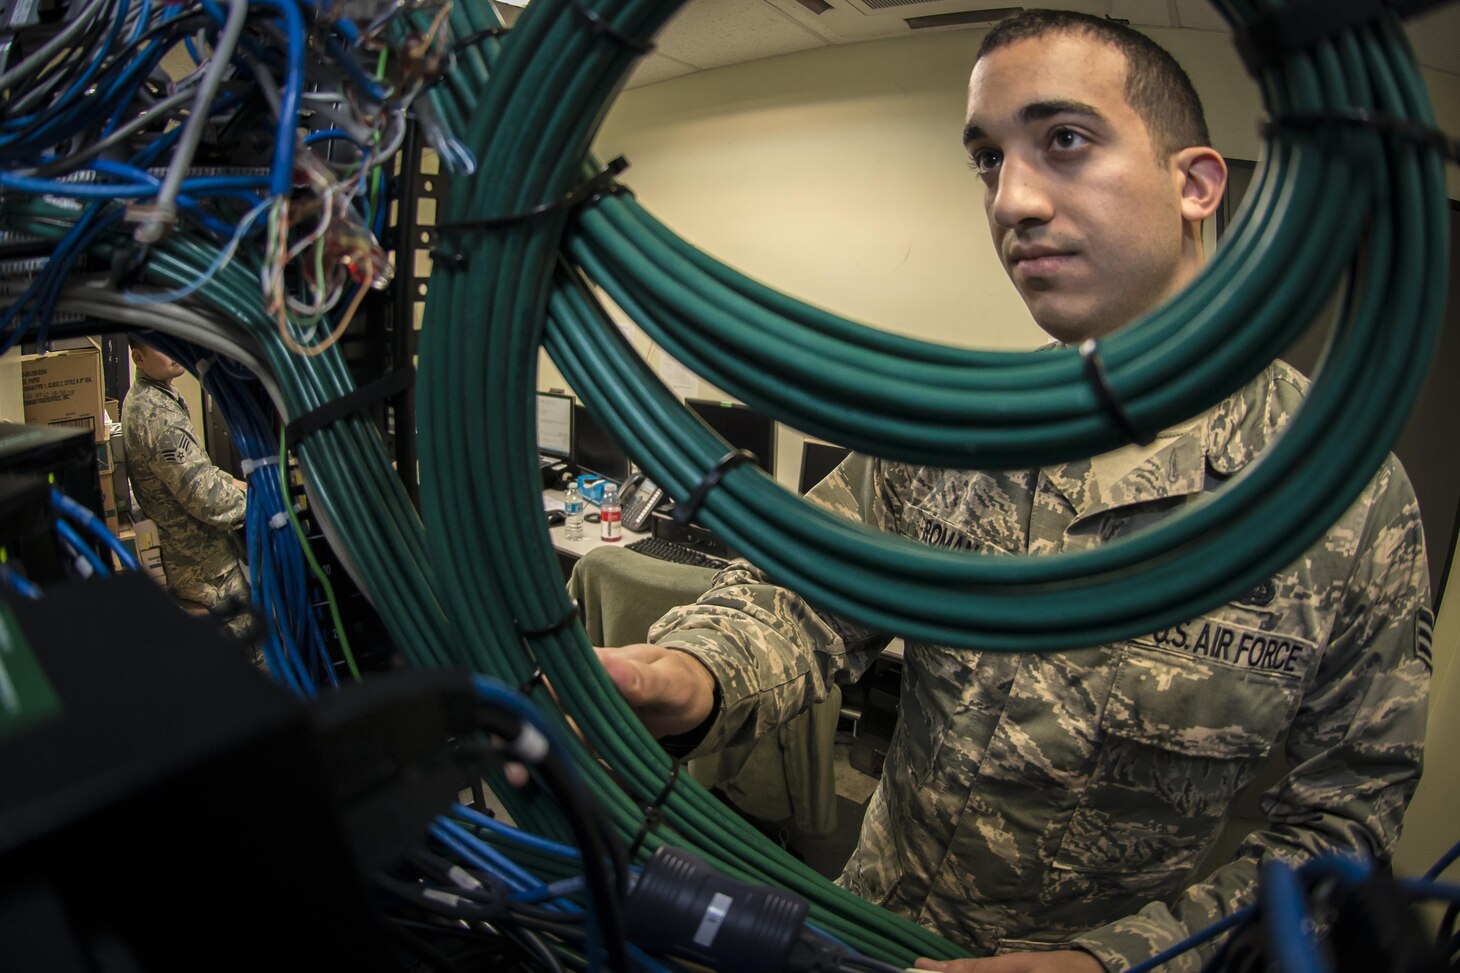 U.S. Air Force Senior Airman Eric Roman, a knowledge management technician with the 747th Communications Squadron at Joint Base Pearl Harbor-Hickam, Hawaii, troubleshoots network issues for the commander’s staff during Key Resolve 2017 at Osan Air Base, ROK, March 22, 2017. From creating launch manuals to storing and disposing of high-level documents, knowledge operations managers care for the flow, distribution, life cycle and disposal of communications and information integral to air, space and cyberspace operations that support the warfighter at home and abroad. (U.S. Air Force photo by Staff Sgt. Benjamin W. Stratton)